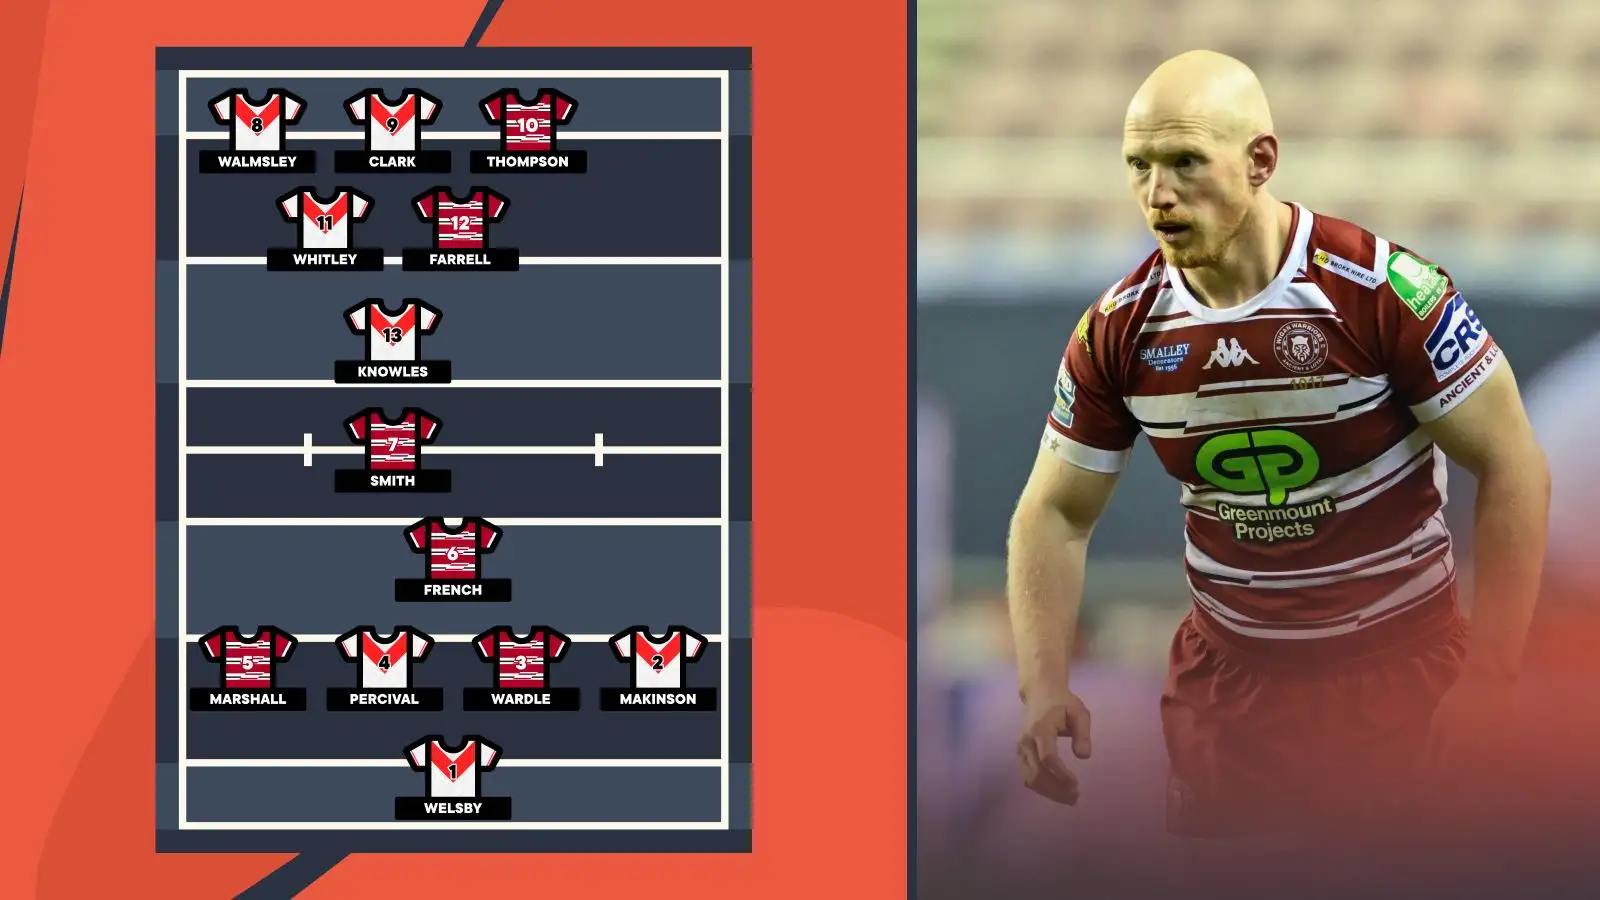 Love Rugby League's combined XIII of St Helens and Wigan Warriors stars, Liam Farrell